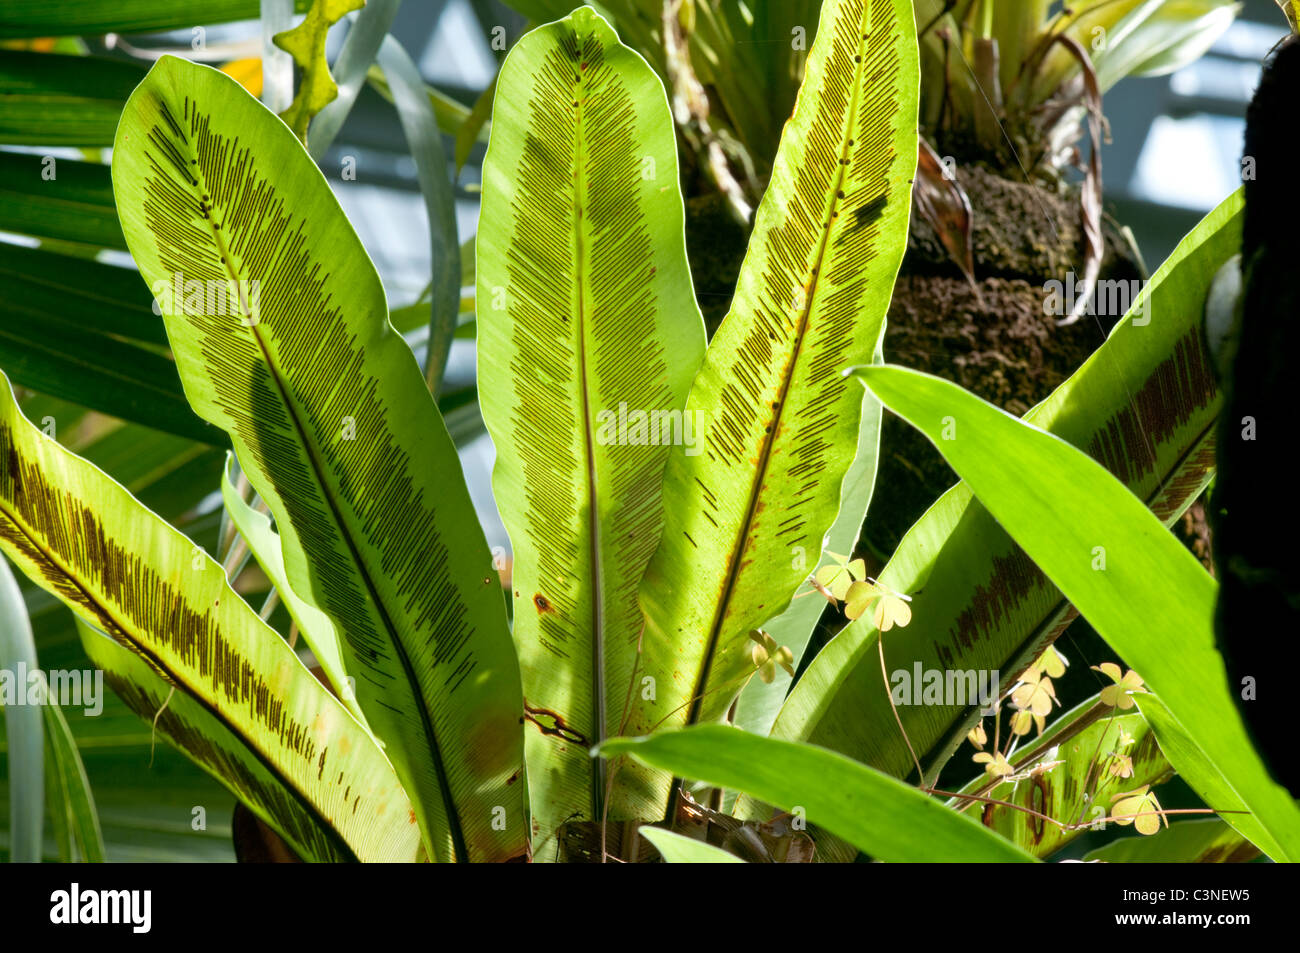 Sunlight glowing through the fronds of a tropical rain forest epiphyte fern, The sporangia are visible as many fine parallel lin Stock Photo